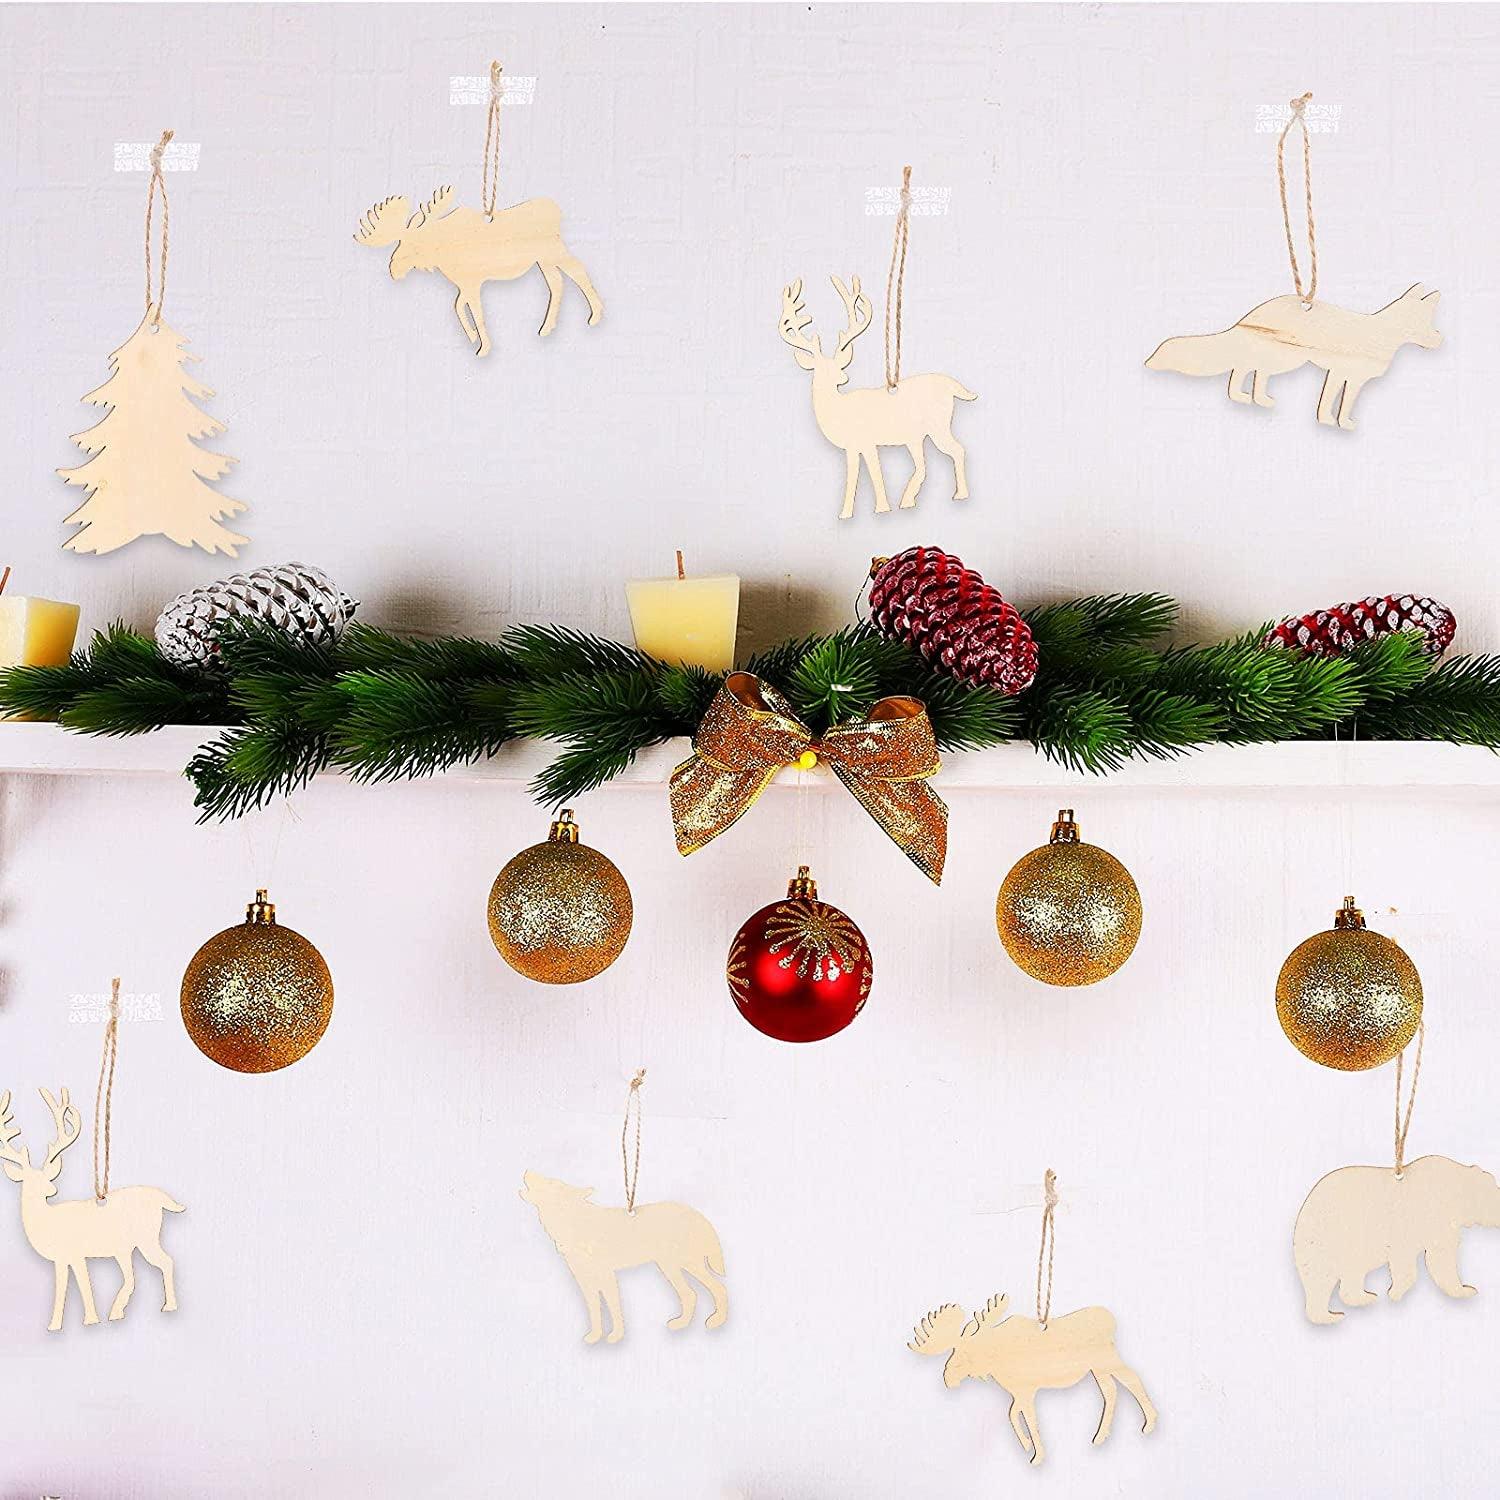 30 Wooden Ornaments Wild Forest Animal Unfinished Hanging Wood Deer Cutouts Animal Party Wall Decor Craft Wood Slices with Rope - WoodArtSupply